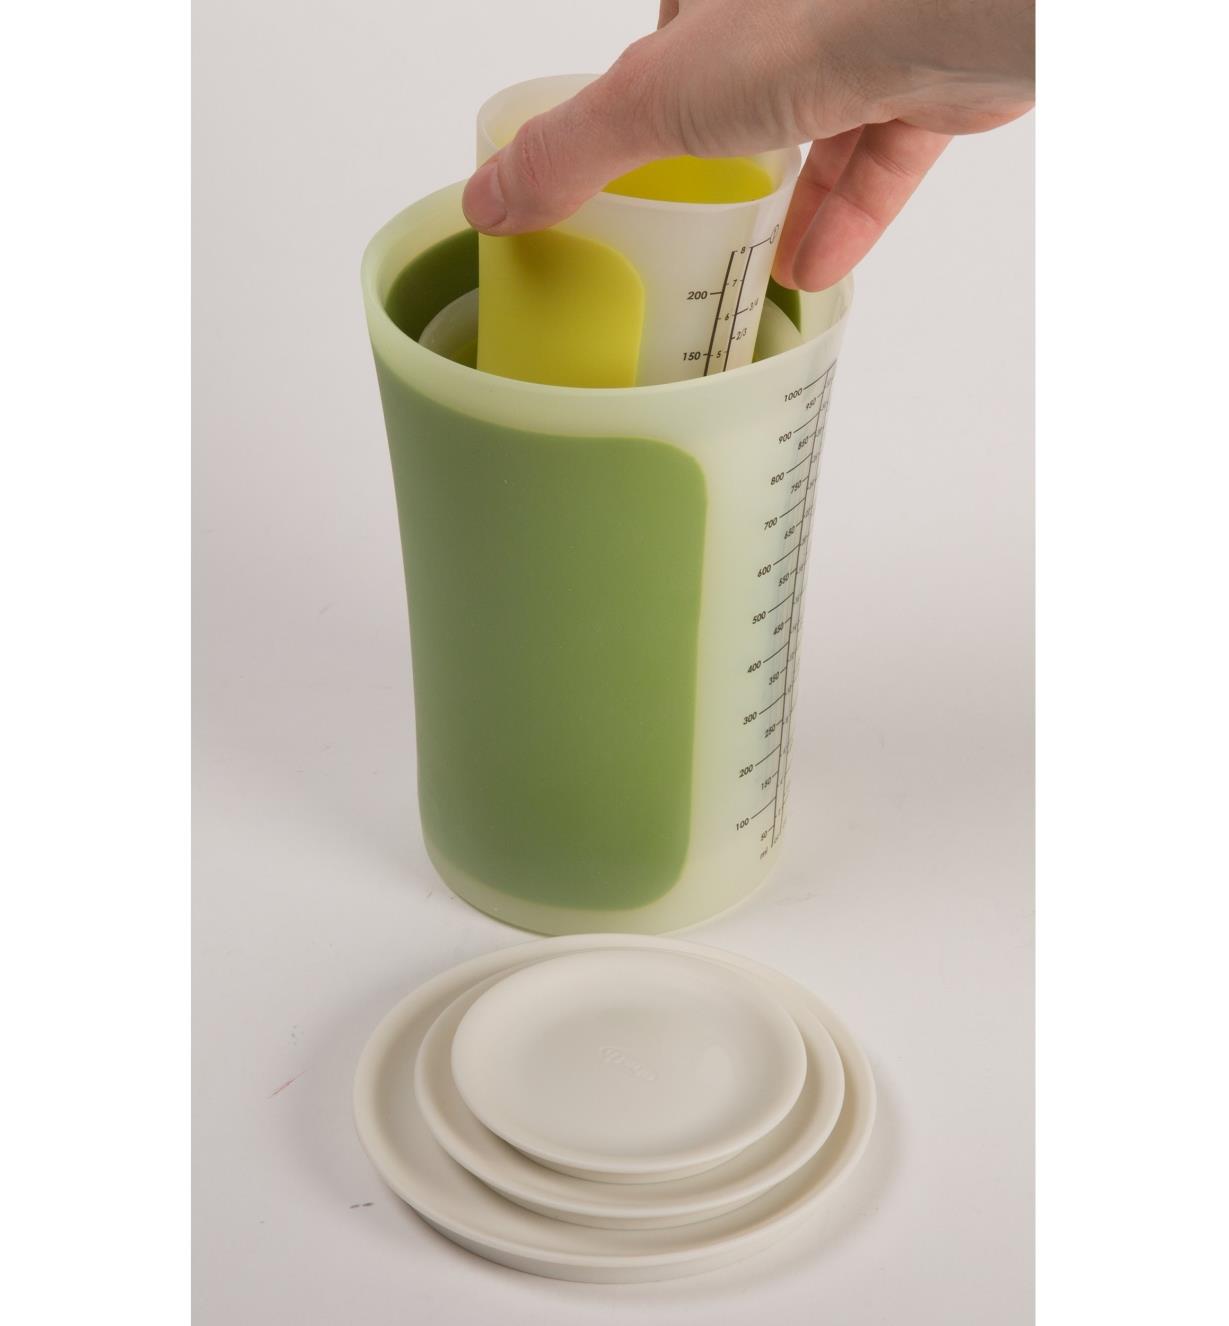 SleekStor Pinch + Pour Collapsible Measuring Cups – Chef'n